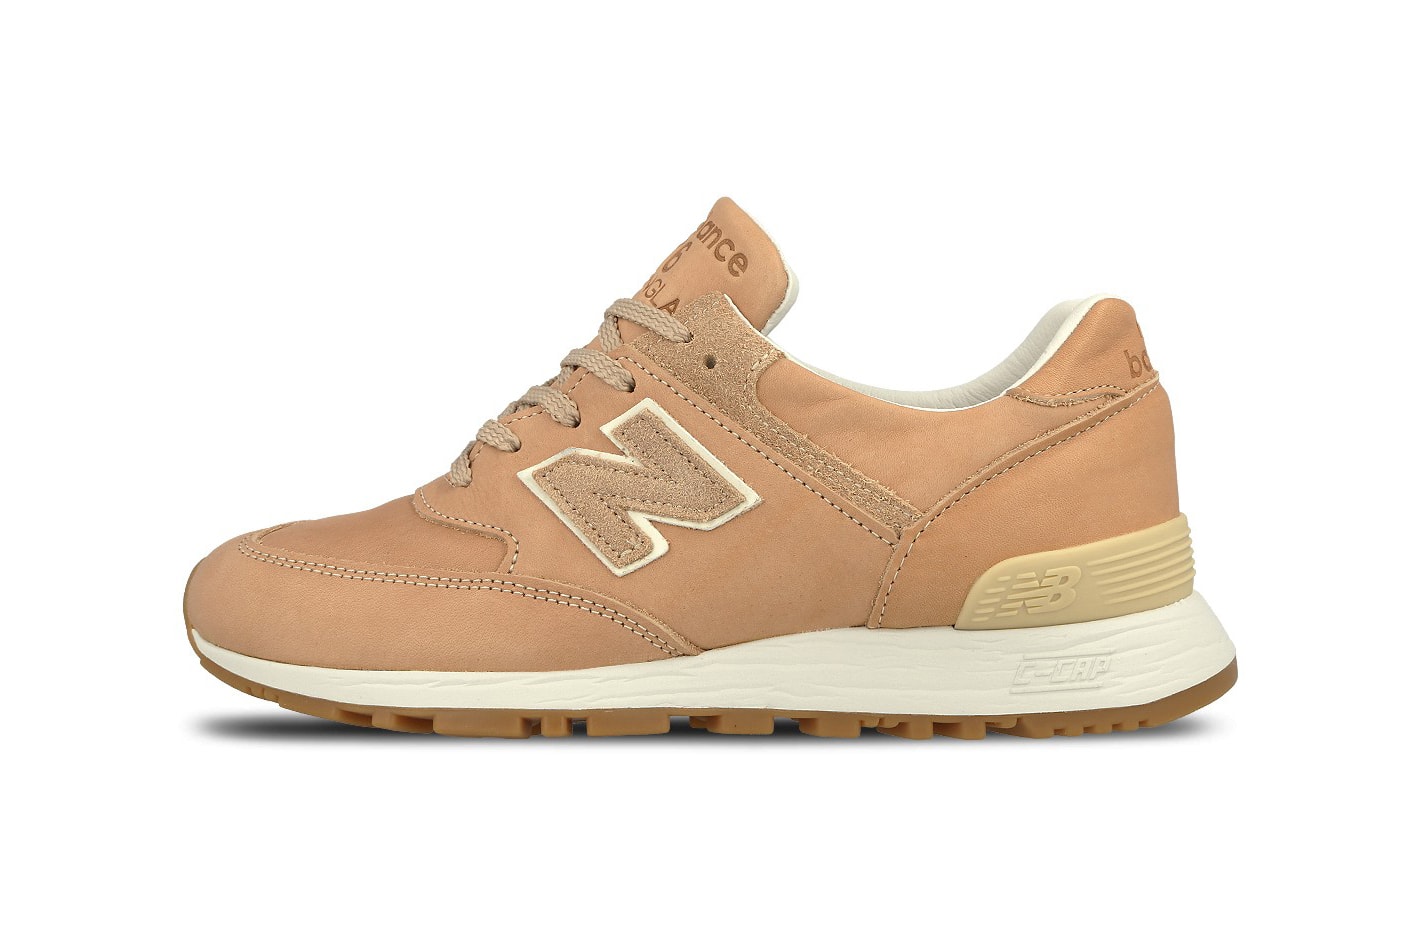 New Balance 576 Horween Leather Co Vegetable Tanned Brown